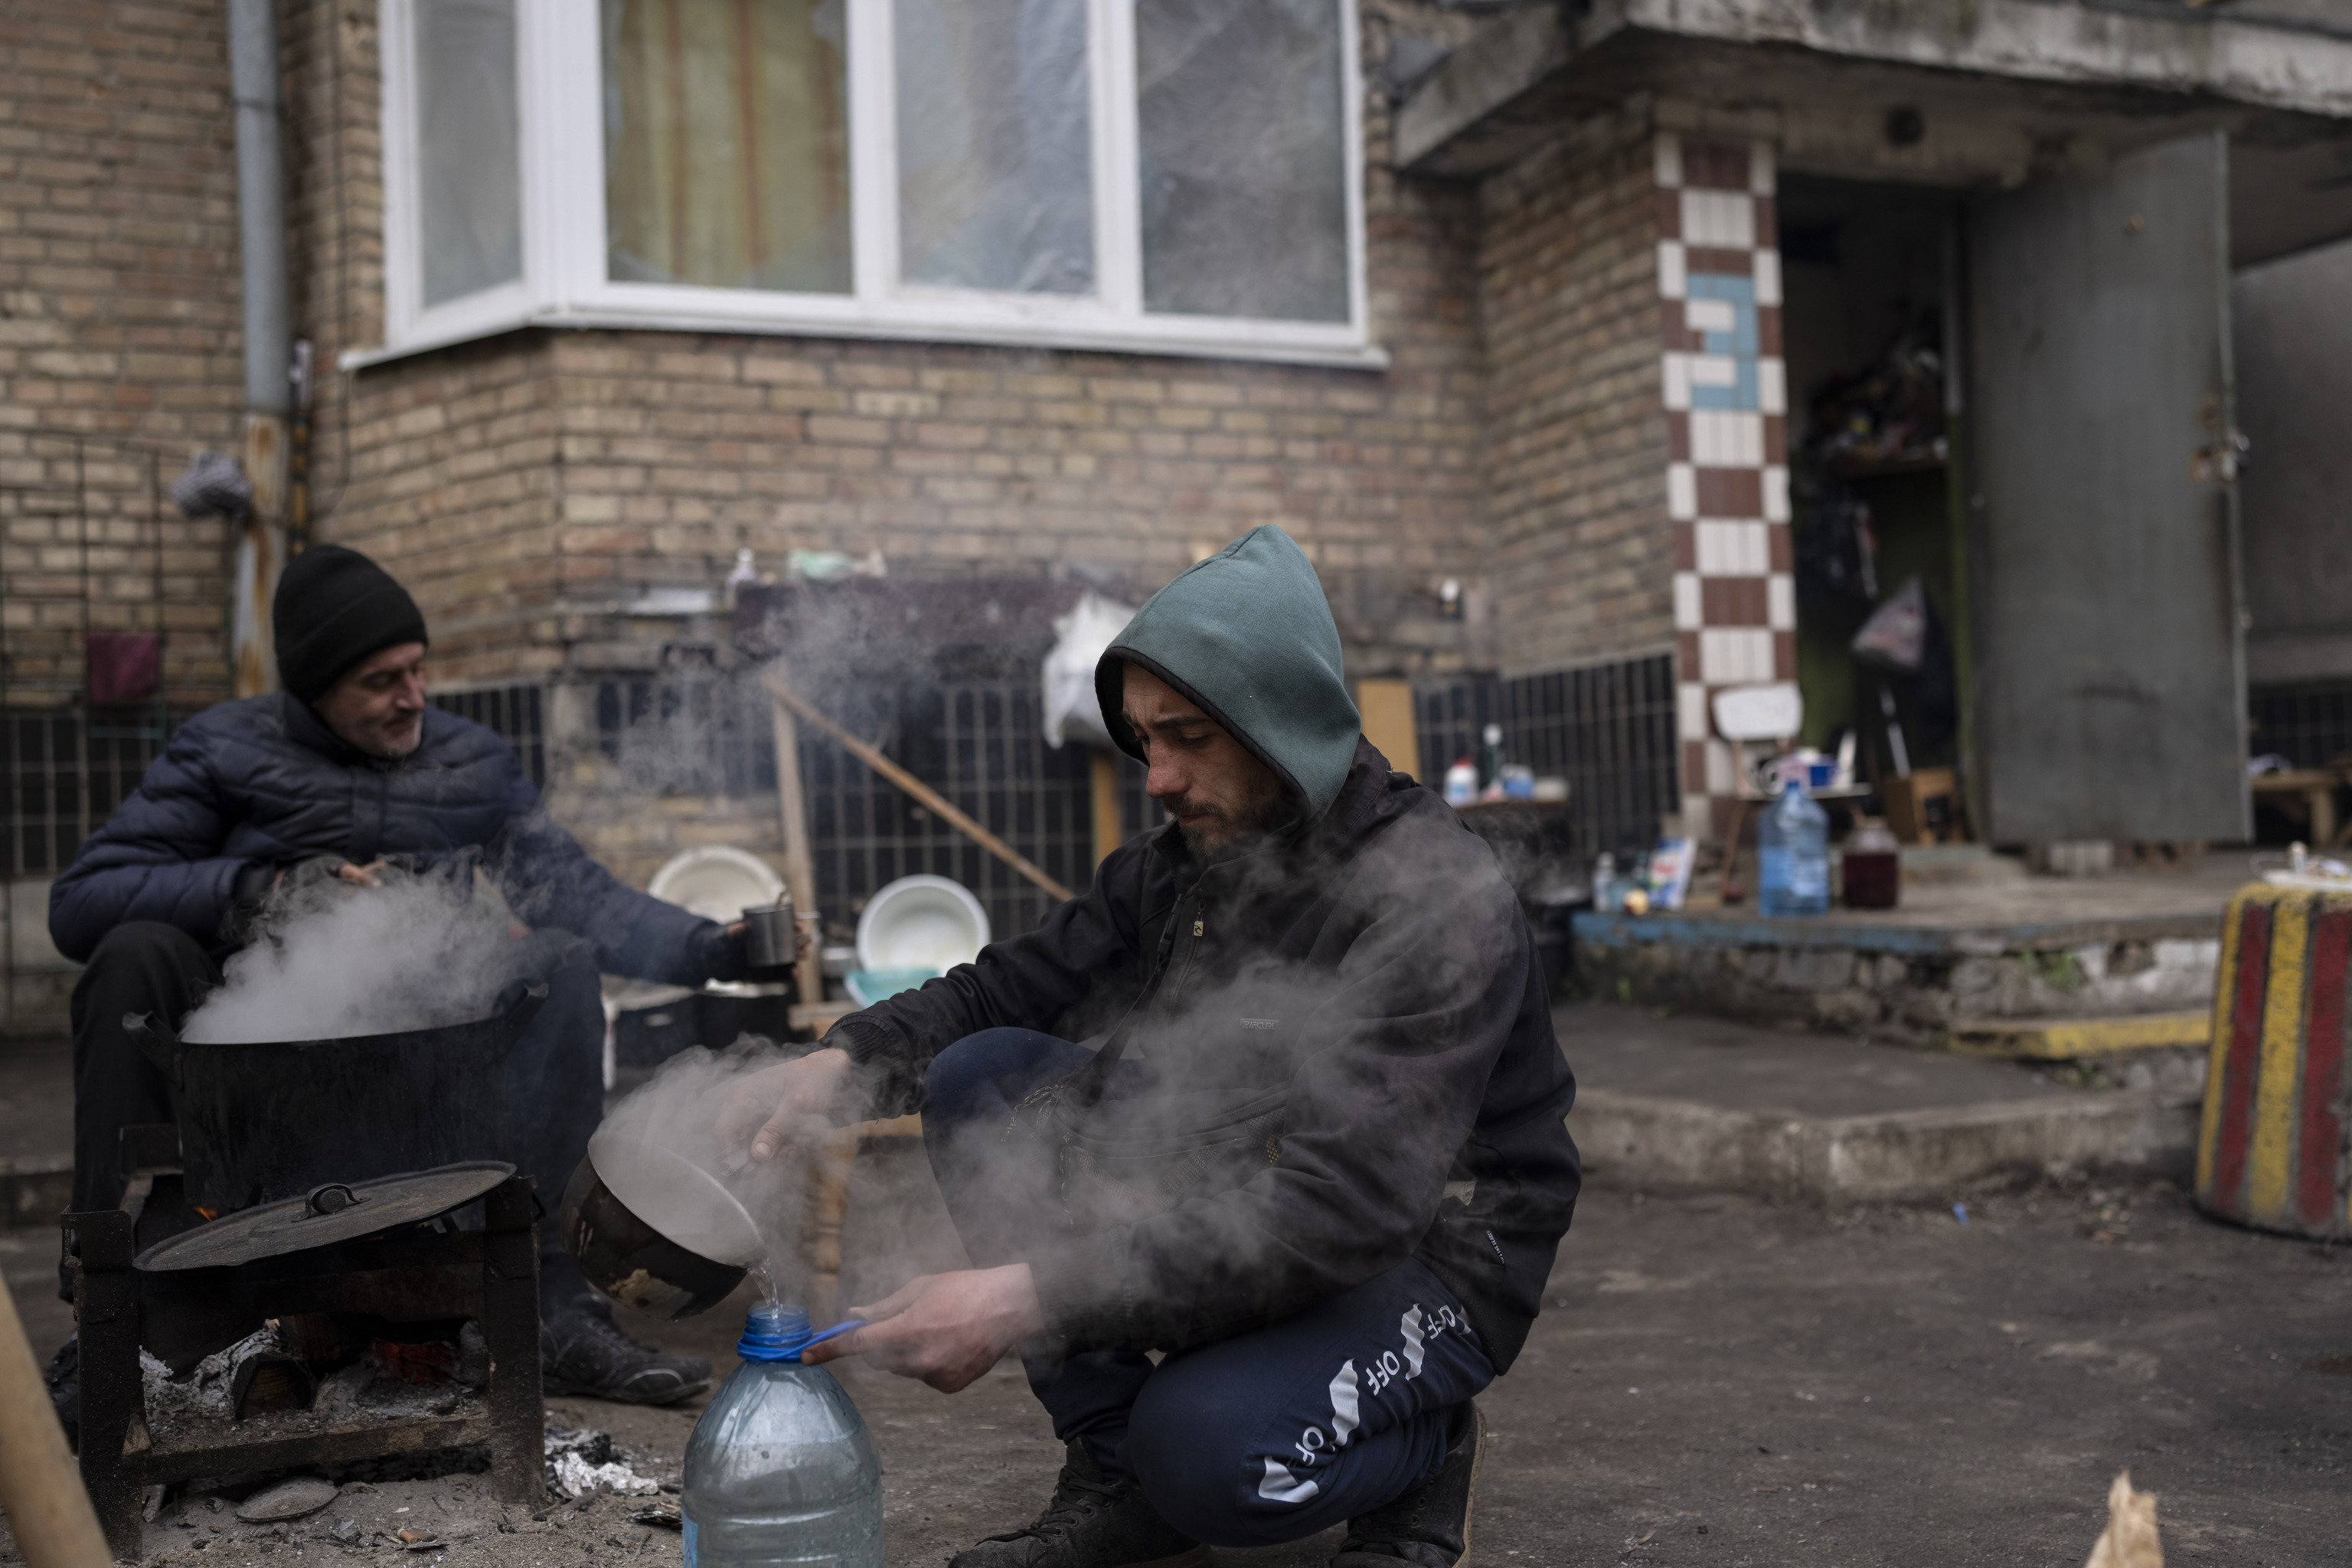 Zhenya Vanag, 32, prepares hot water to take a shower outside his house destroyed by Russian shelling in Irpin, on the outskirts of Kyiv, on Thursday, April 21, 2022. Citizens of Irpin are still without electricity, water and gas after since the Russian invasion began. (AP Photo/Petros  lt;HIT gt;Giannakouris lt;/HIT gt;)